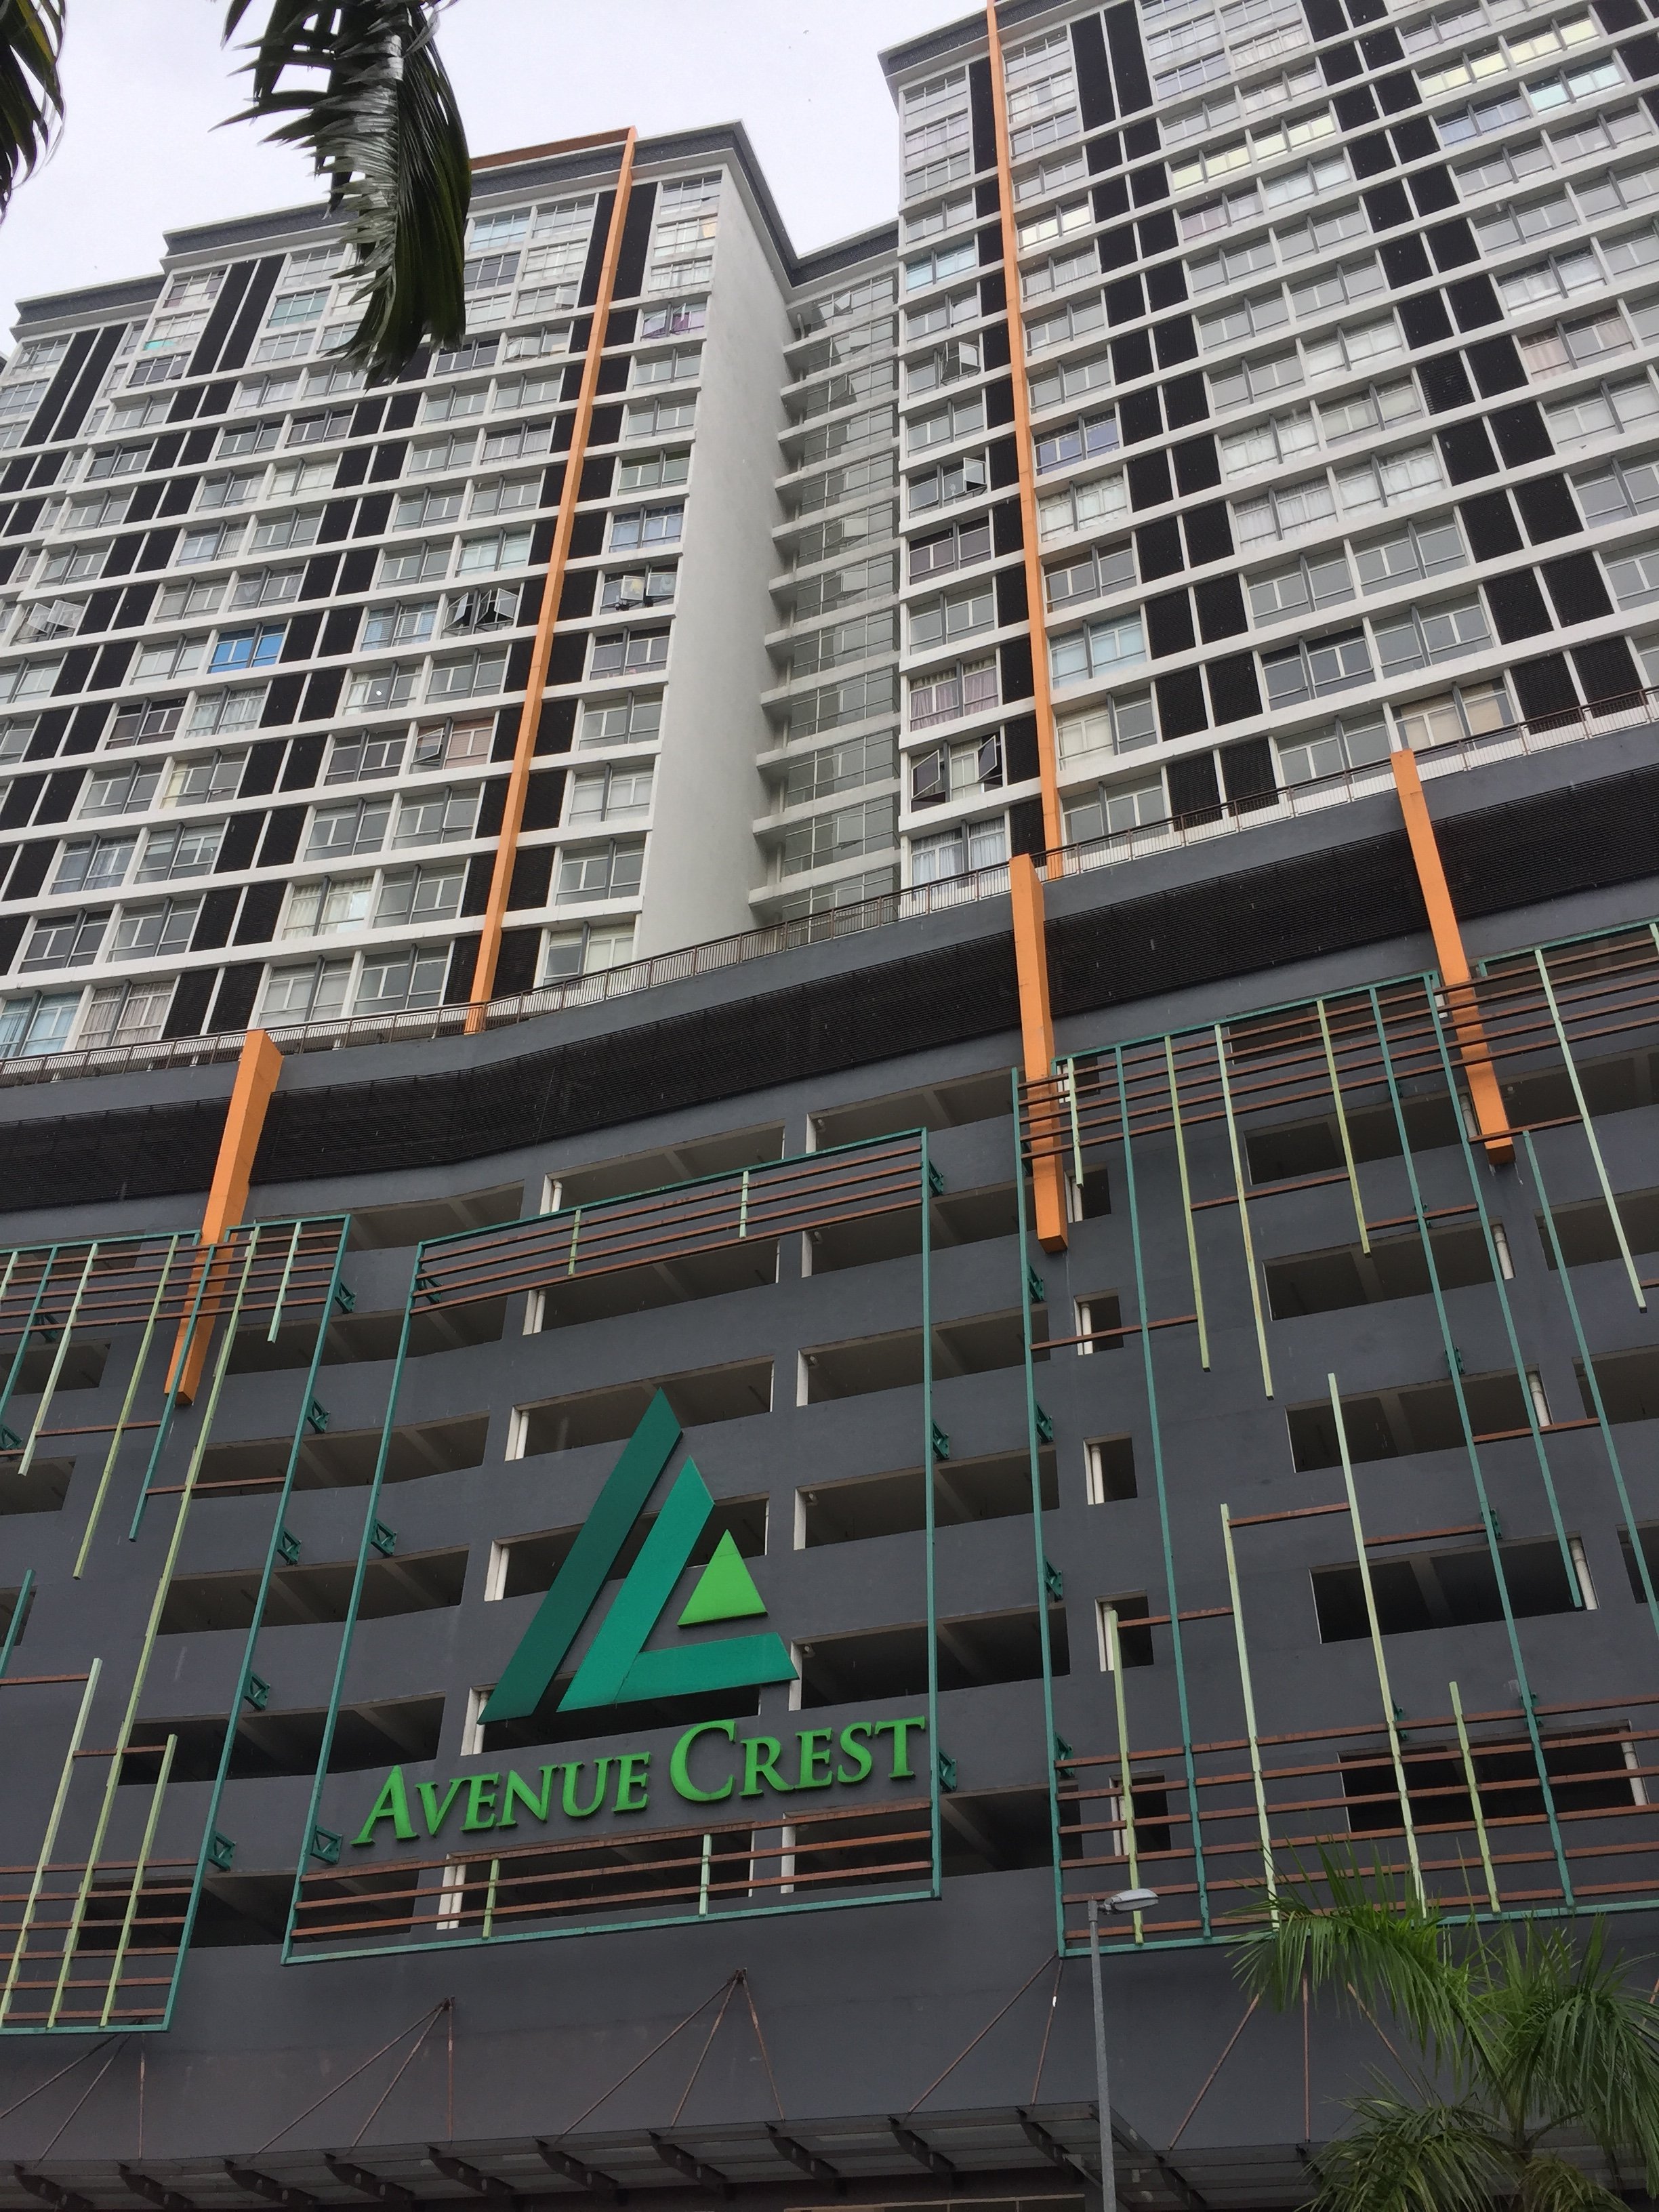 Avenue Crest Sofo For Sale For Sale Rm300 000 By Seng Joe Edgeprop My